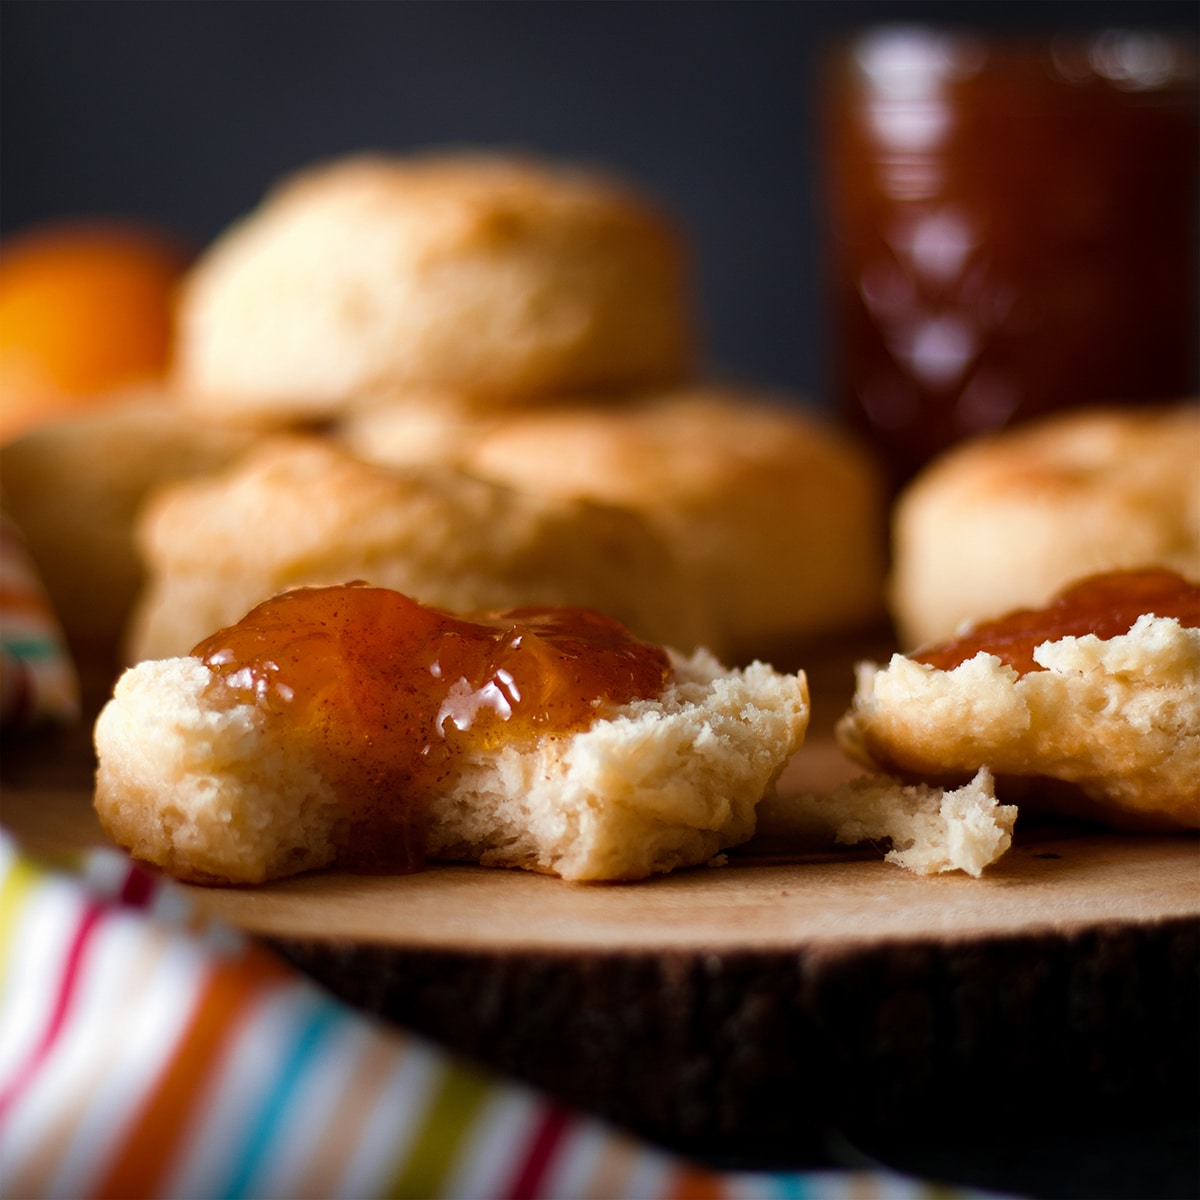 A buttermilk biscuit spread with homemade peach preserves with a bite taken out of it.